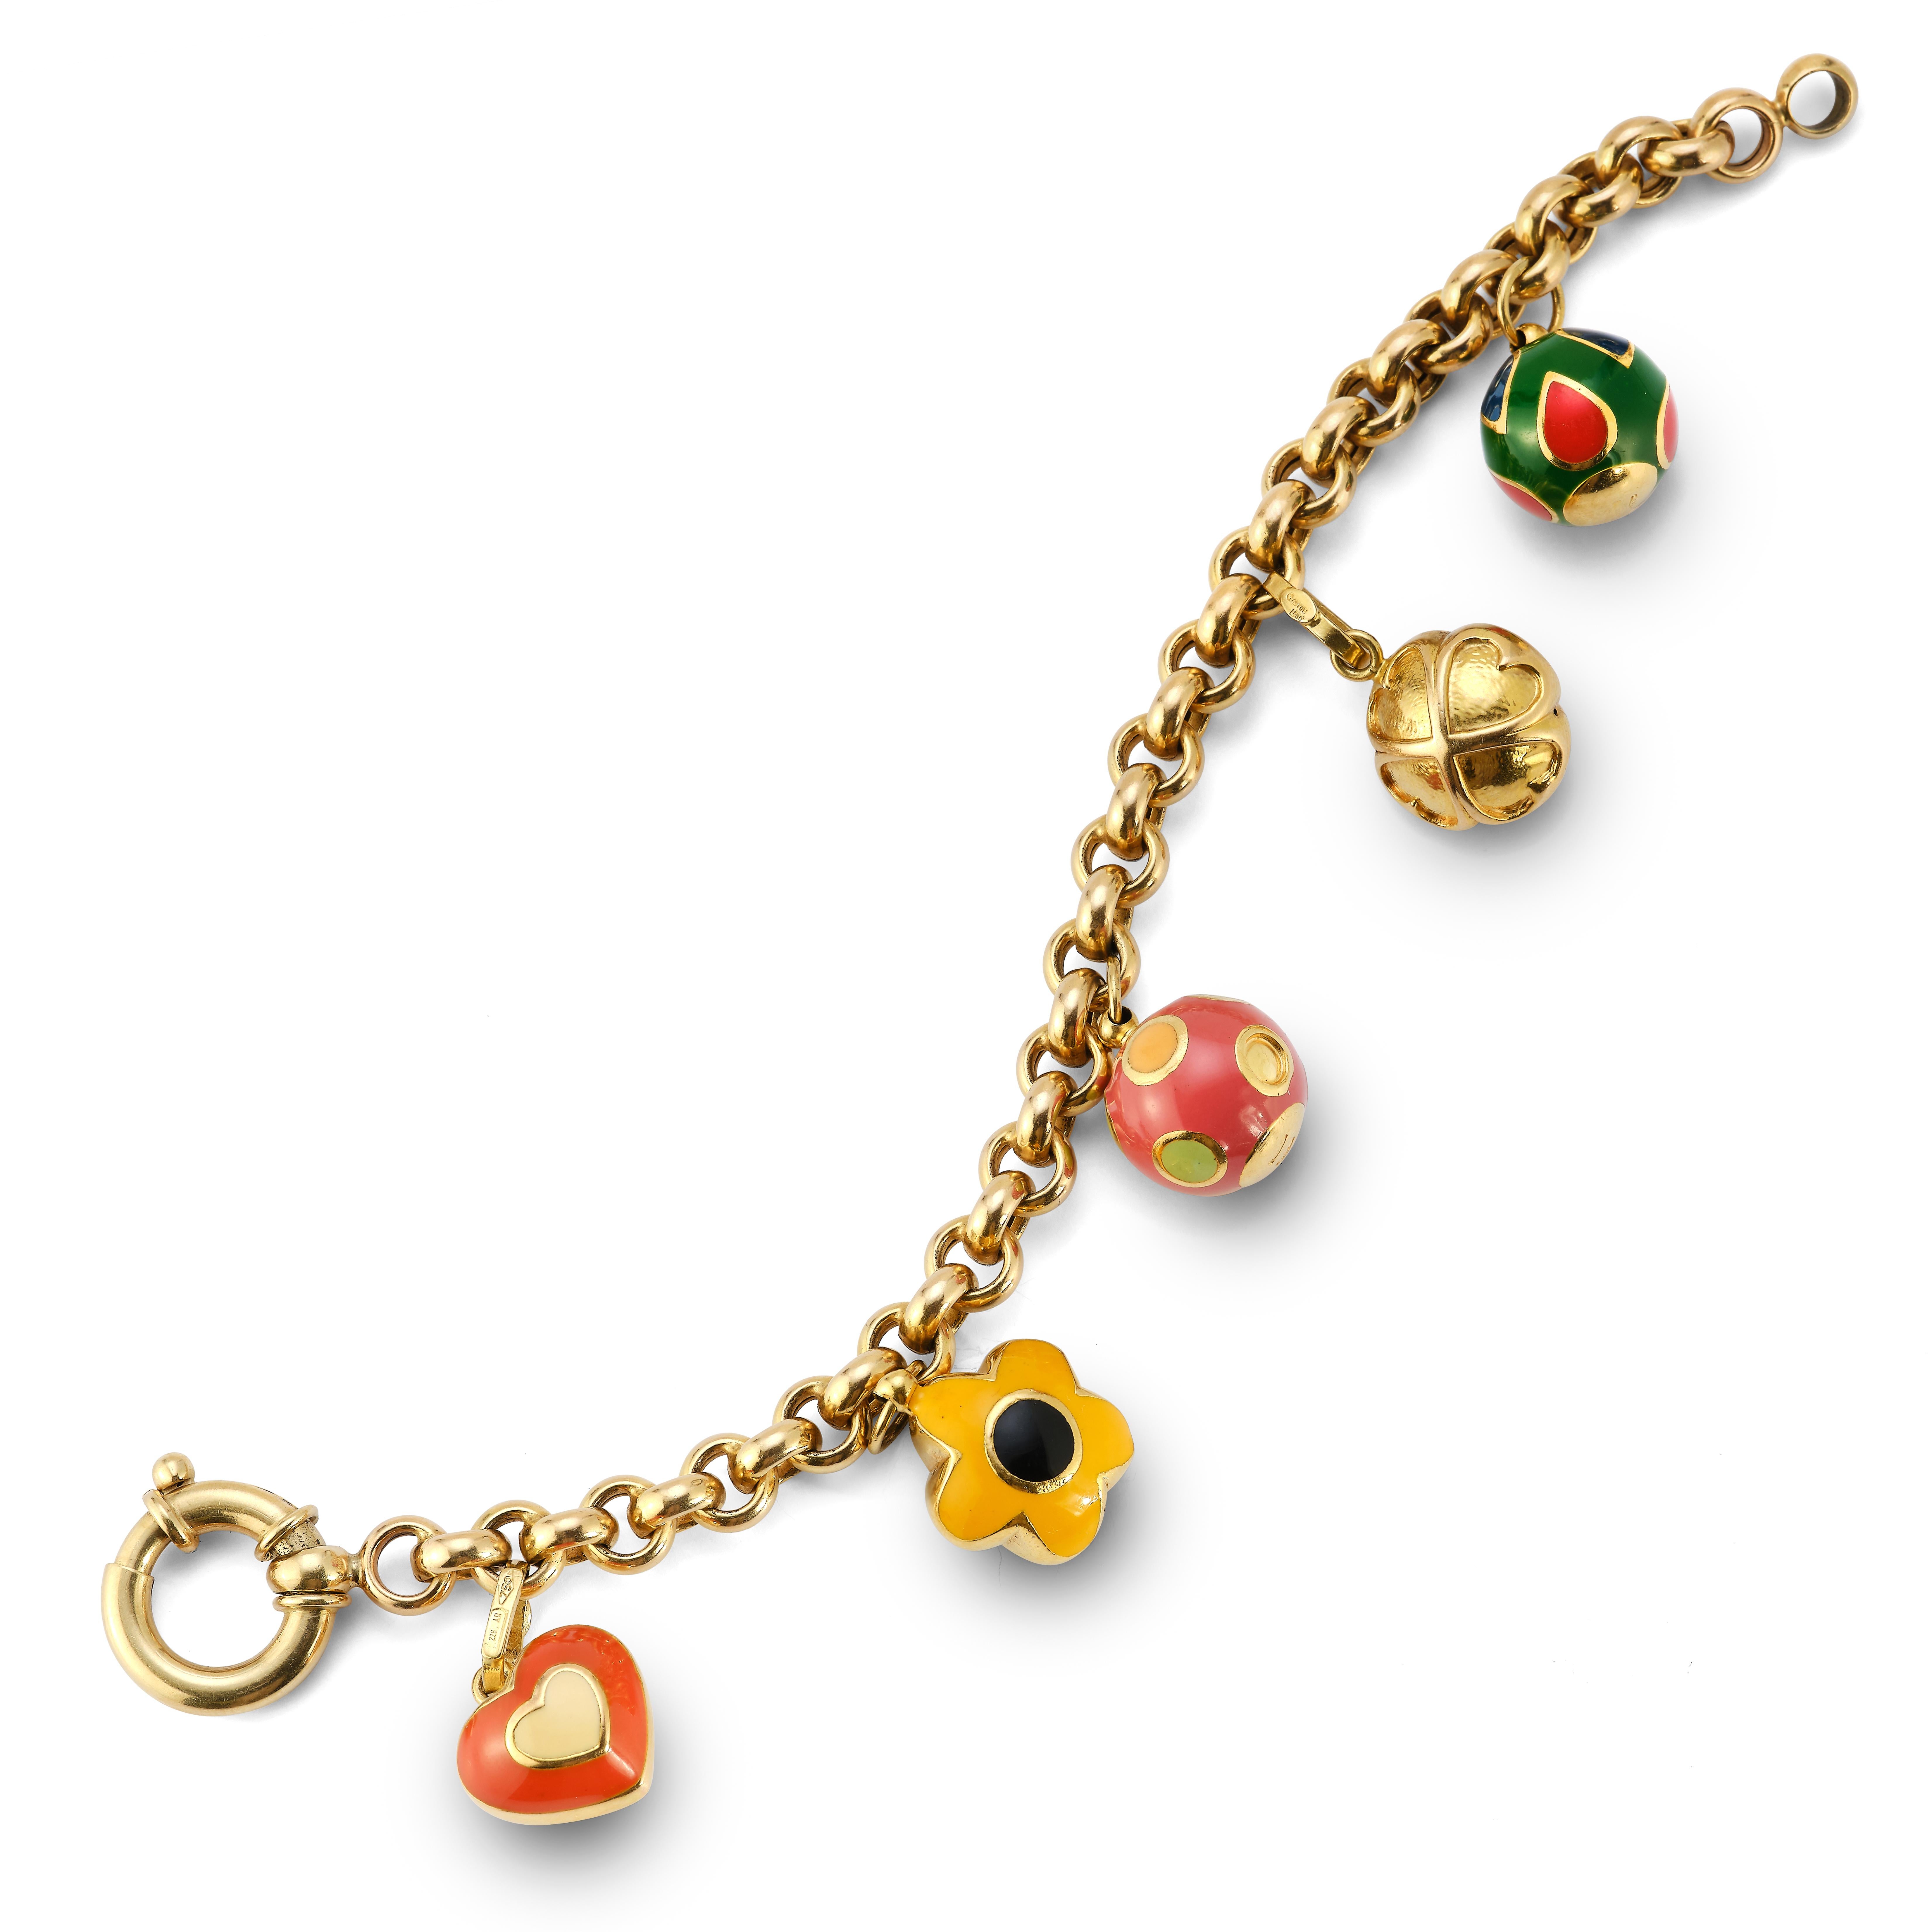 Gold  and Enamel Charm Bracelet
 
Yellow gold bracelet with 5 round enameled gold charms 

Length: 7.5